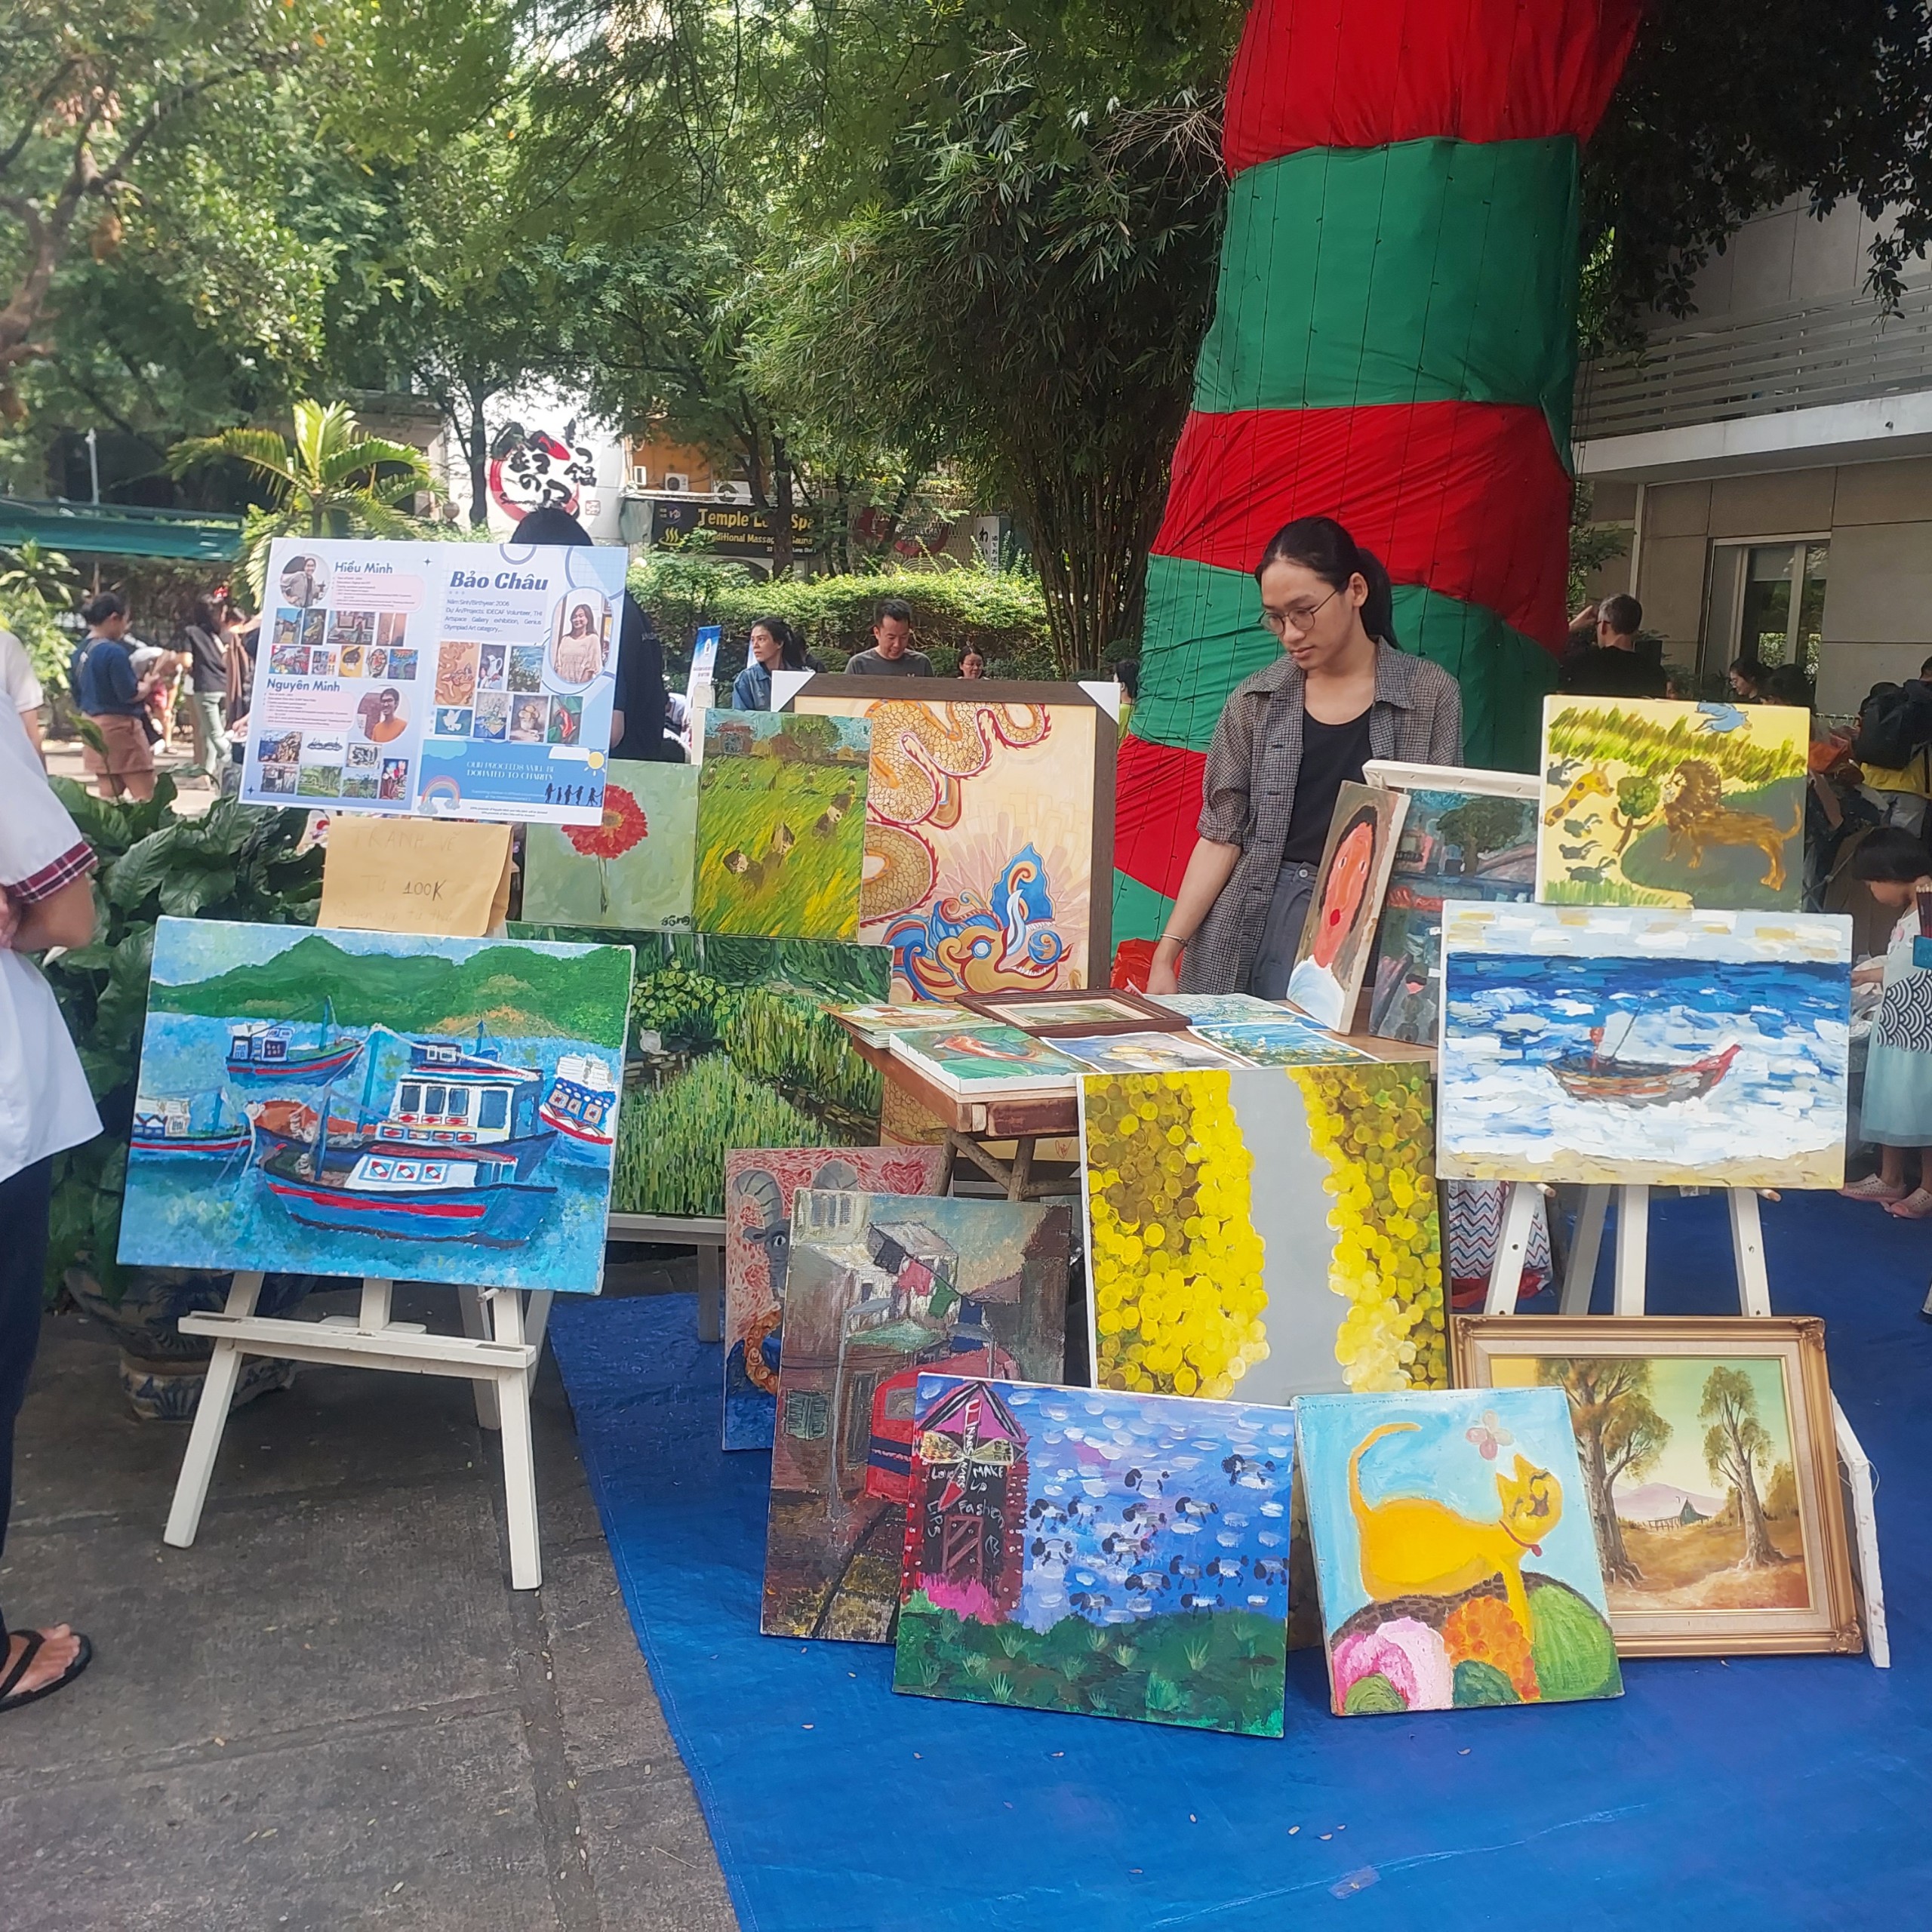 Dat, 26, the owner of the painting stall, said he had sold about four paintings. These paintings were drawn by university and high school students. Depending on the artist, 50-100 percent of profits will be donated to children at Children's Hospital 2. Photo: Minh Chau / Tuoi Tre News